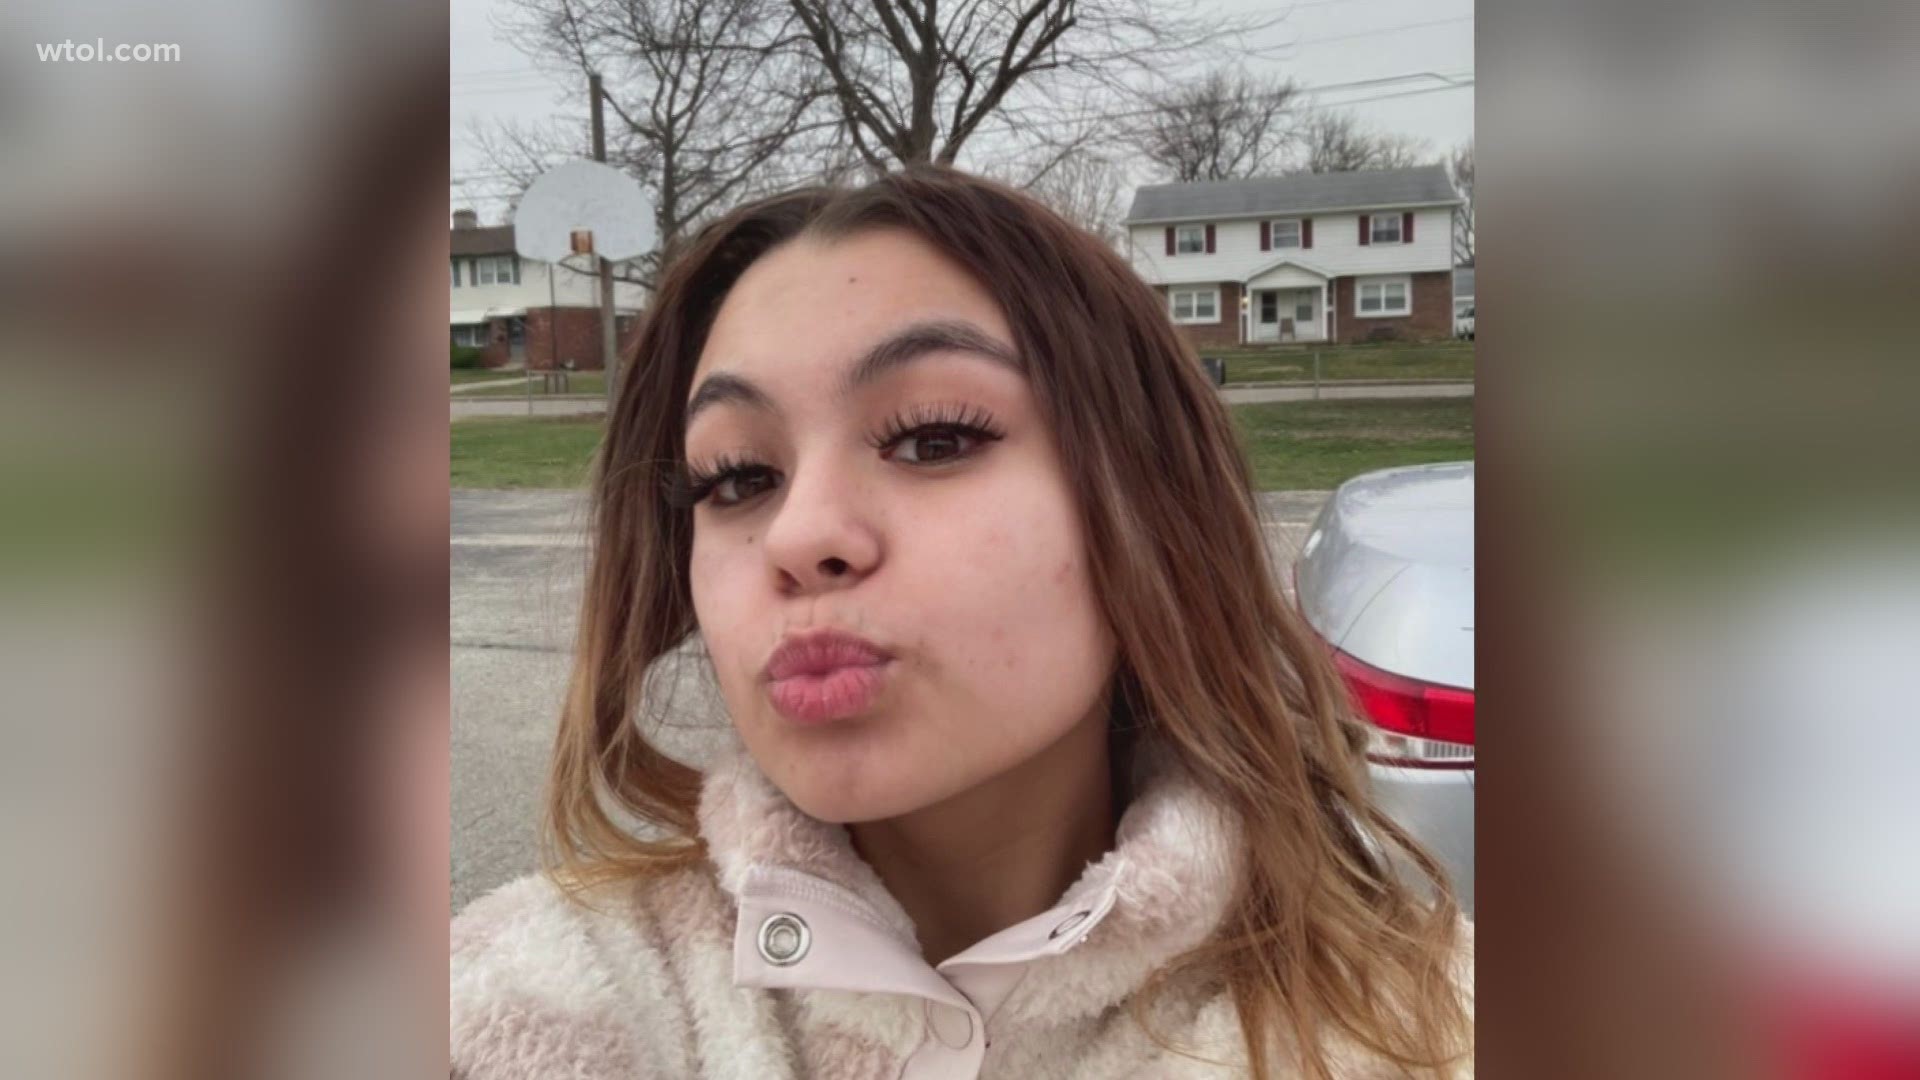 17-year-old Estrella "Star" Lopez disappeared after running away from her grandmother's home July 16.